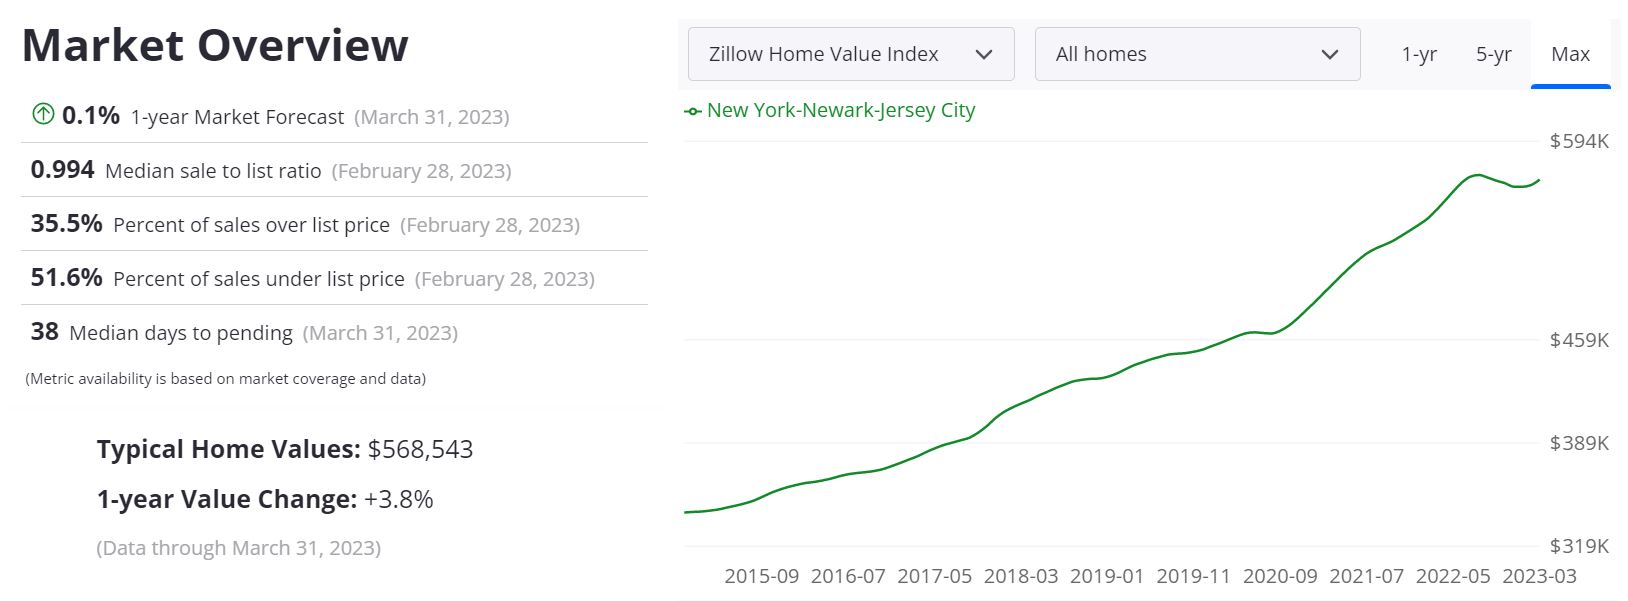 NYC Real Estate Market Prices, Trends & Forecast 2023